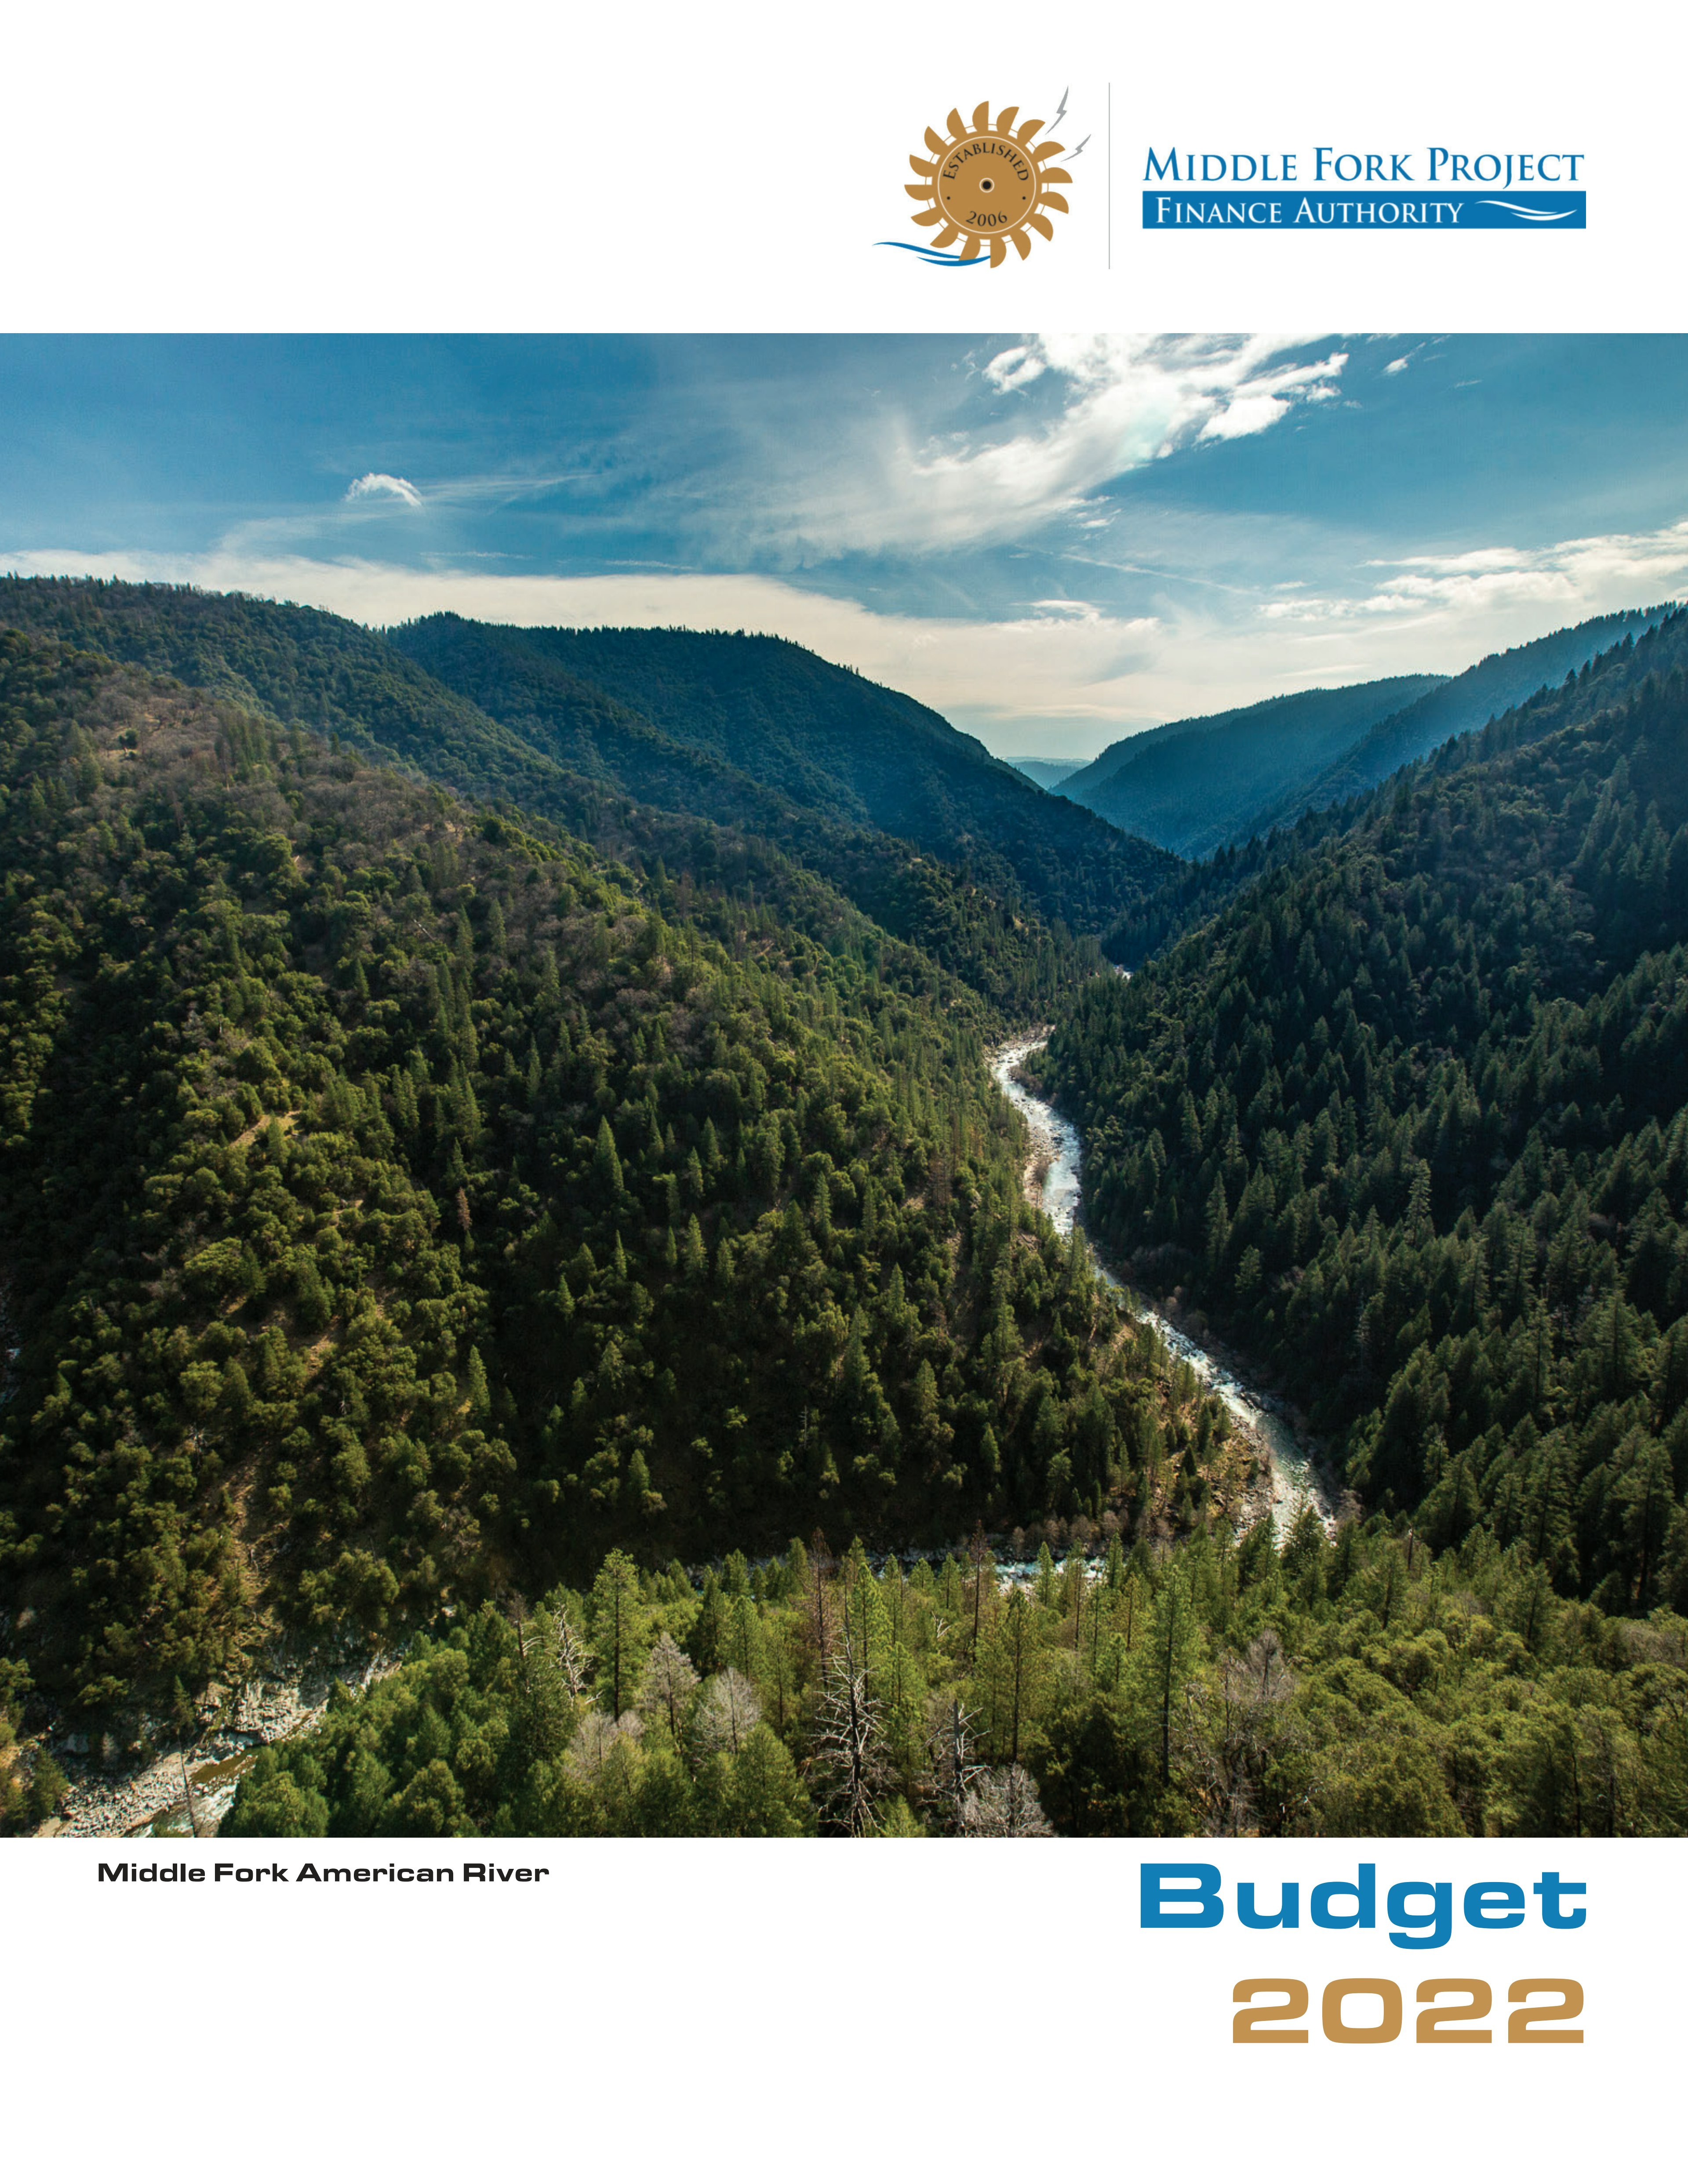 Annual Report Thumbnail and link for 2022 Budget pdf